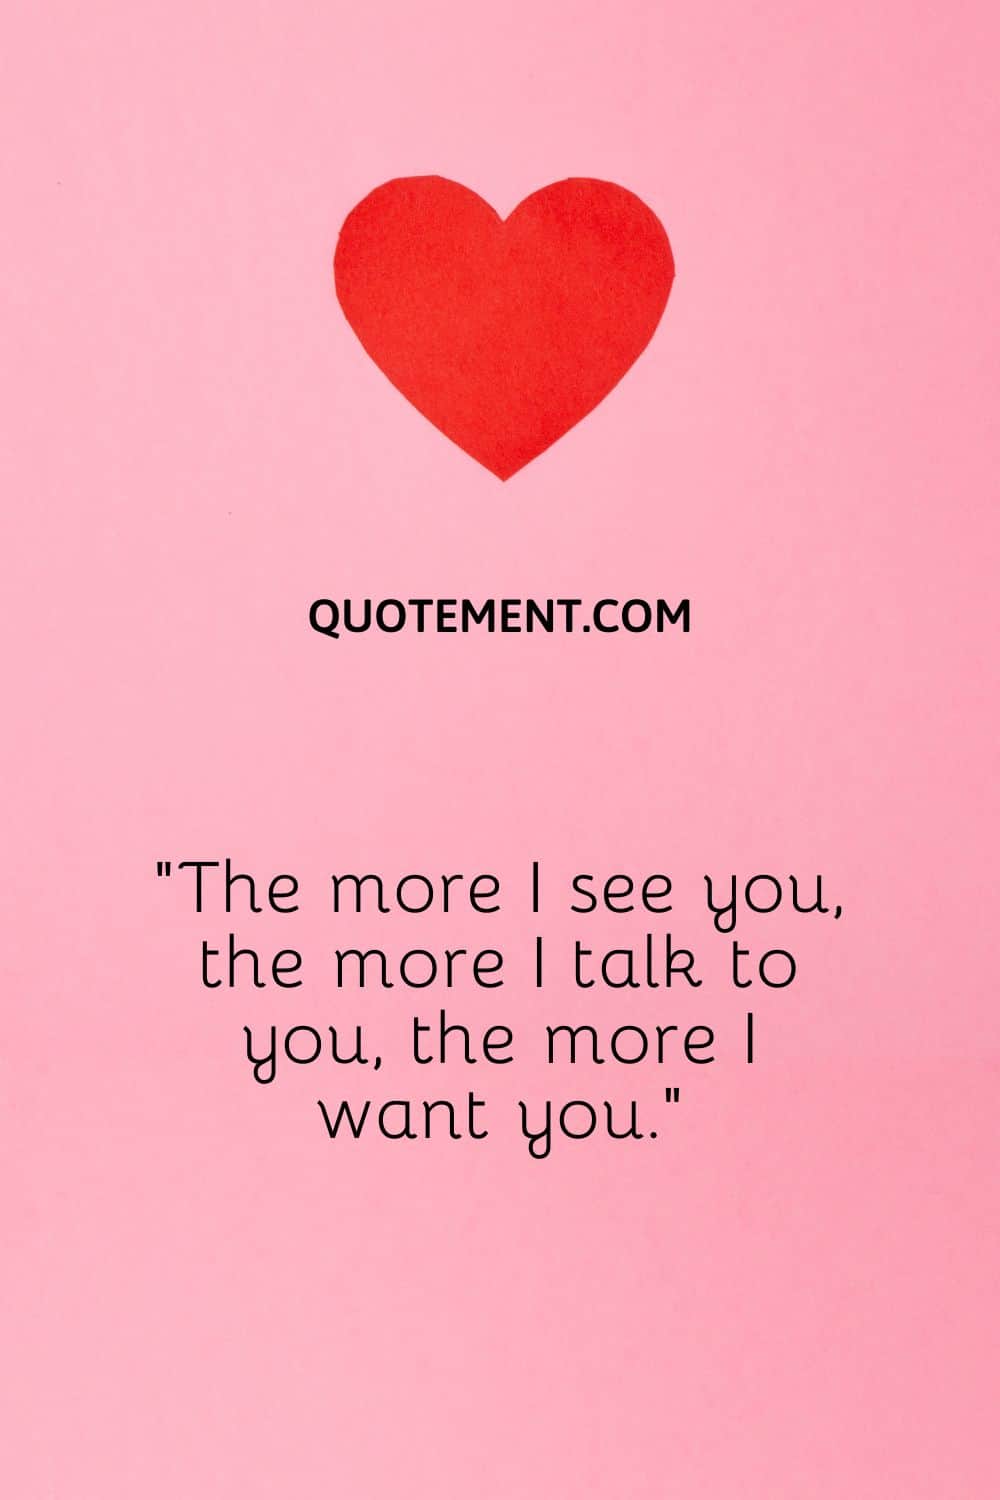 The more I see you, the more I talk to you, the more I want you